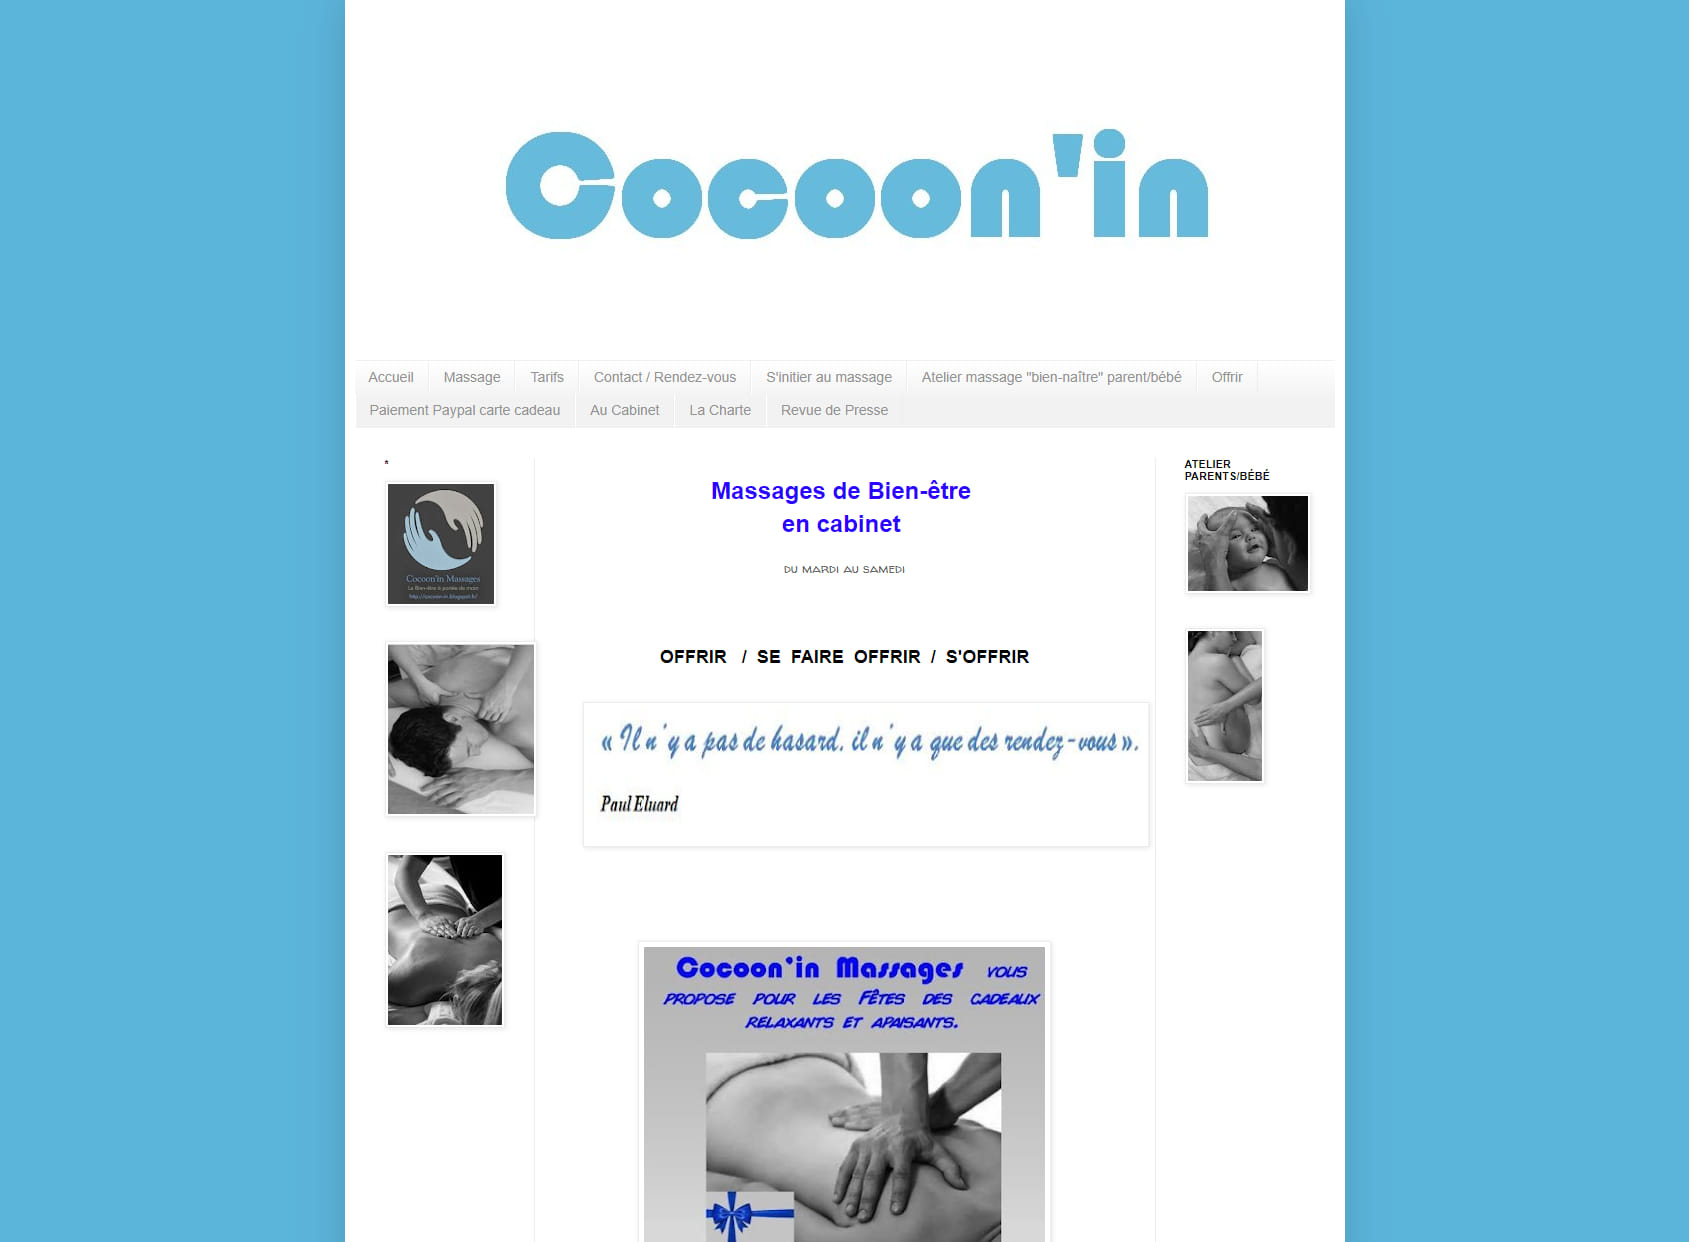 Cocoon'in massages